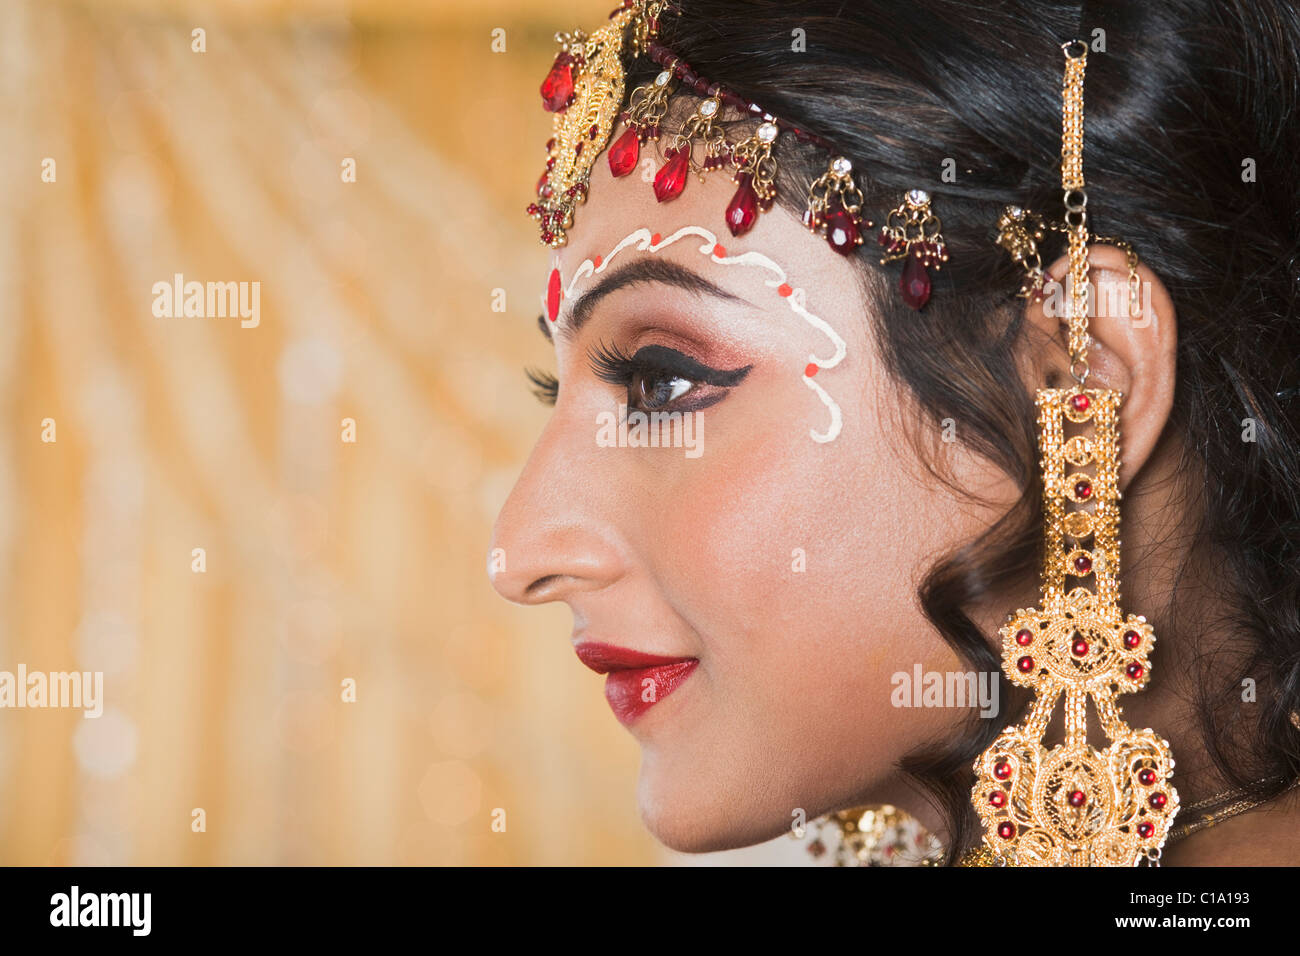 Close-up of a bride wearing jewelry Stock Photo